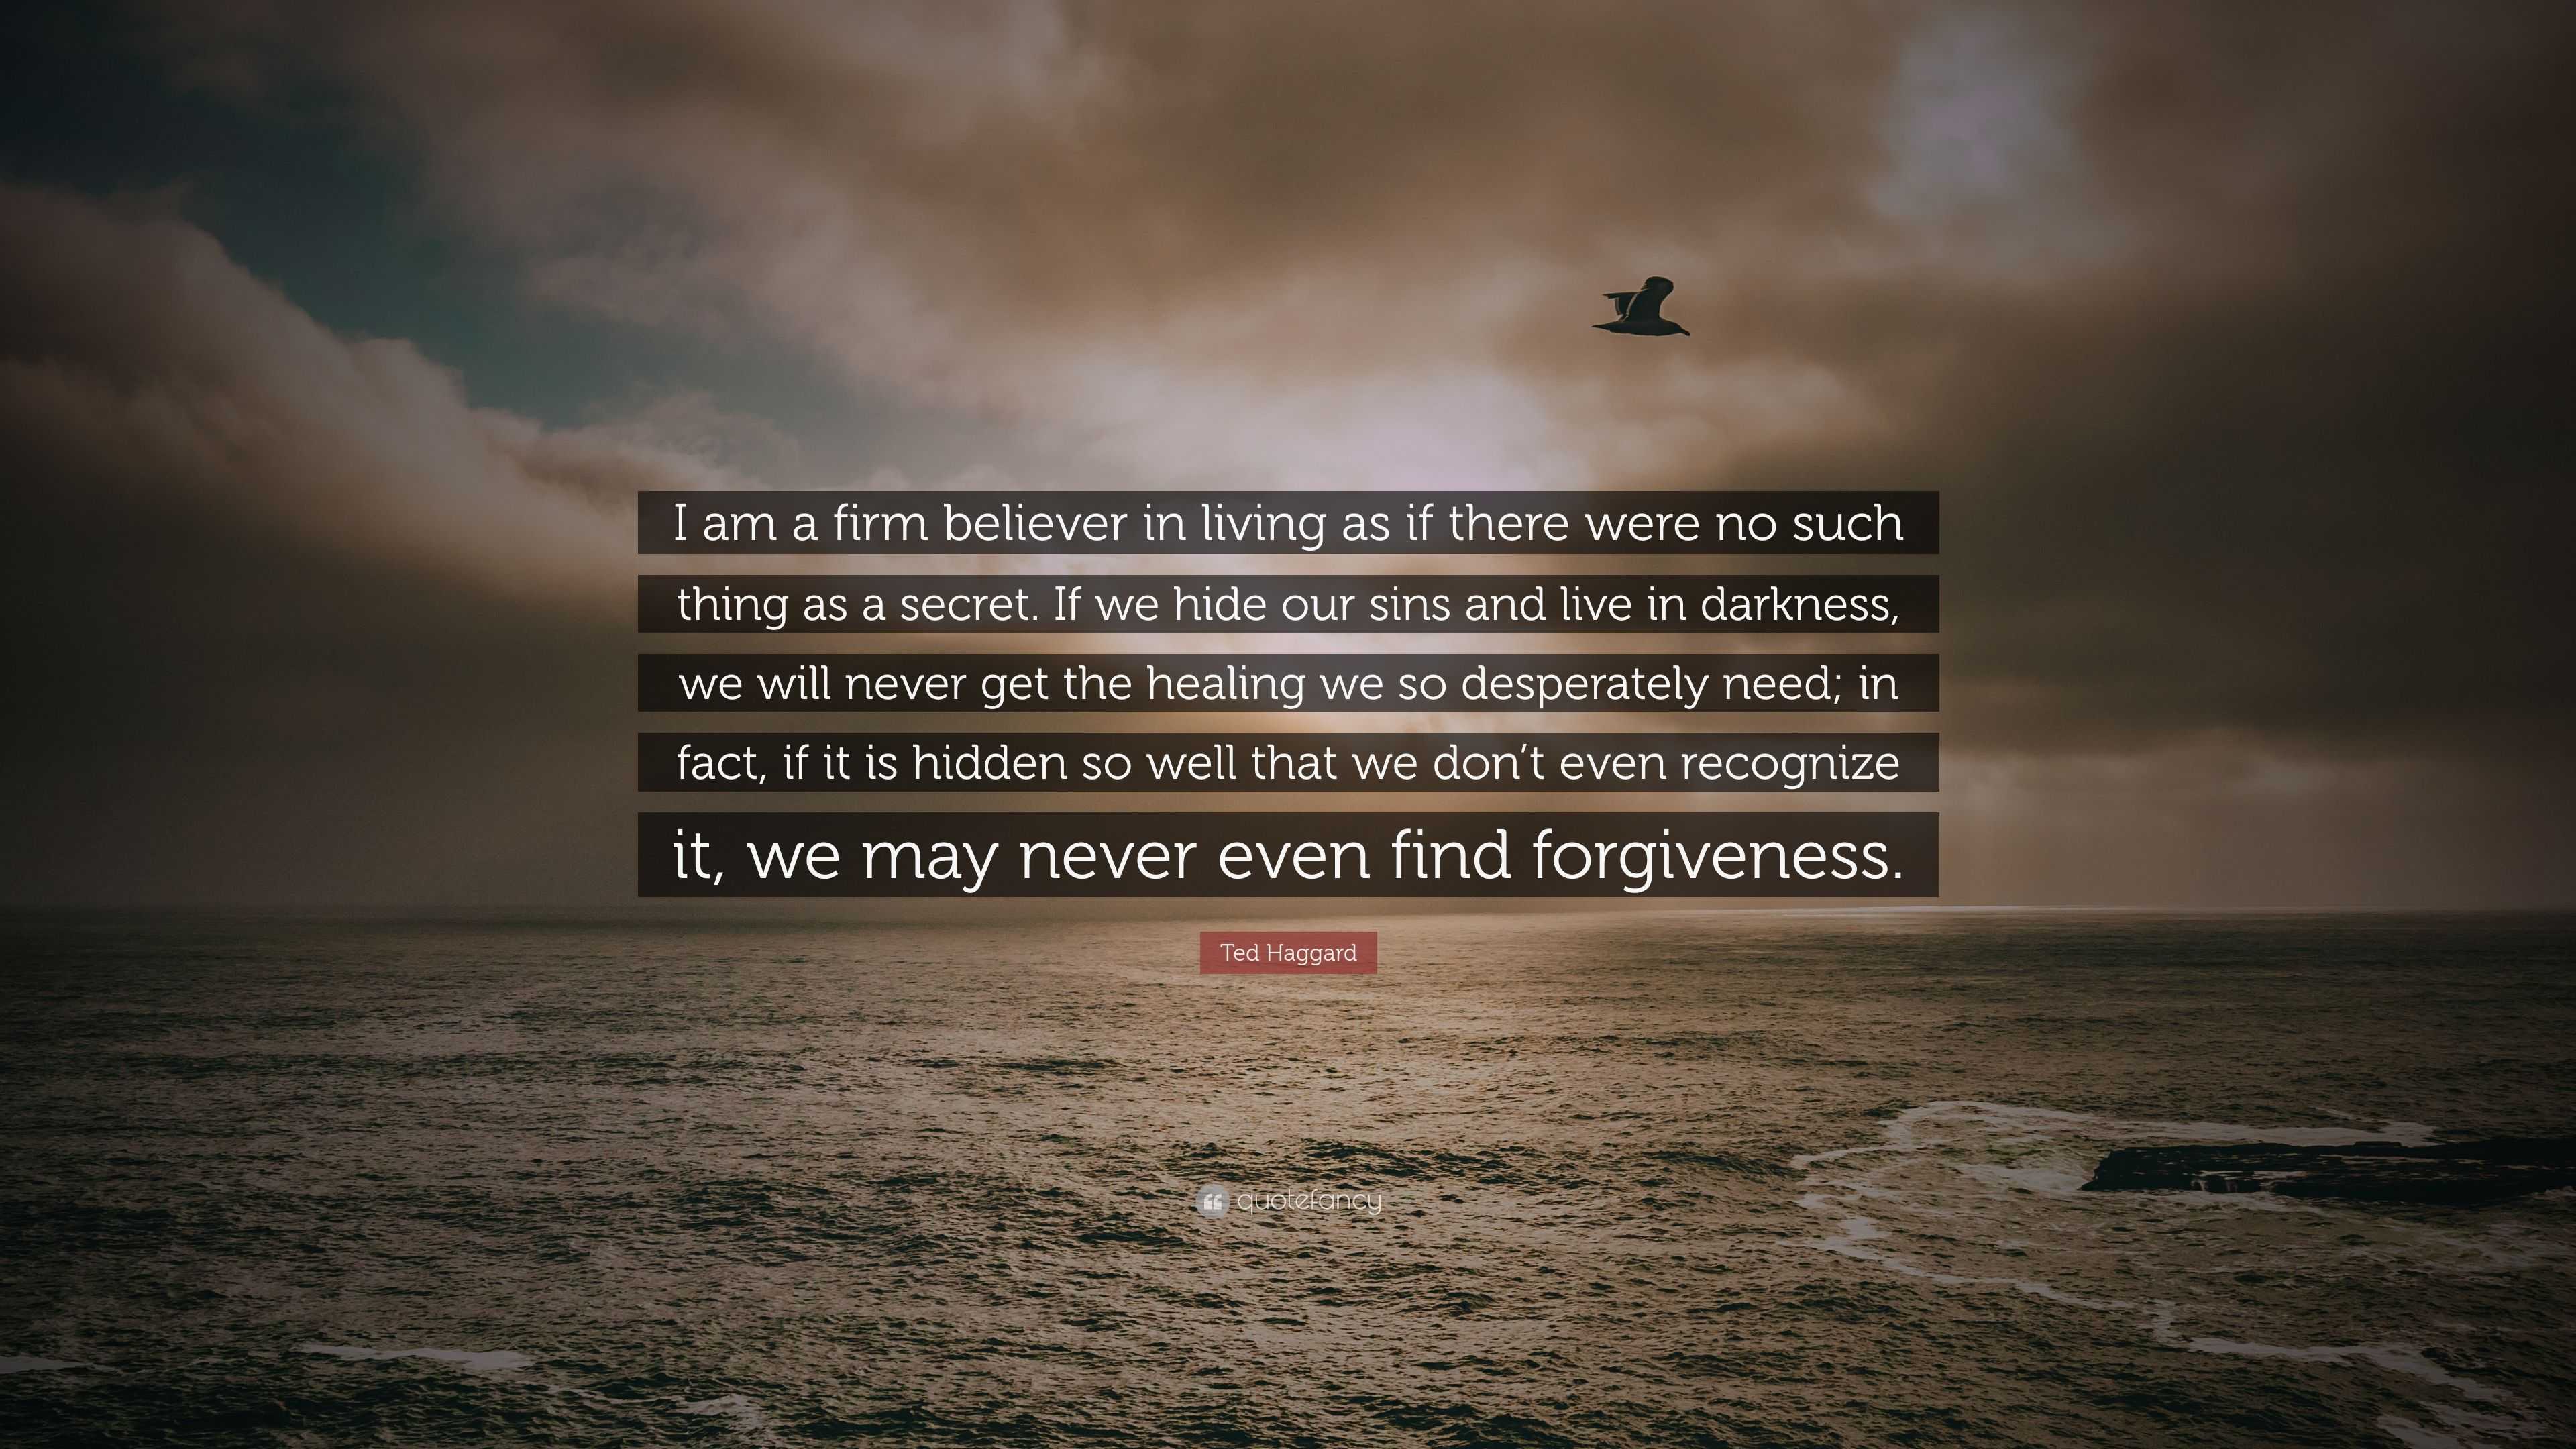 Ted Haggard quote: I am a firm believer in living as if there